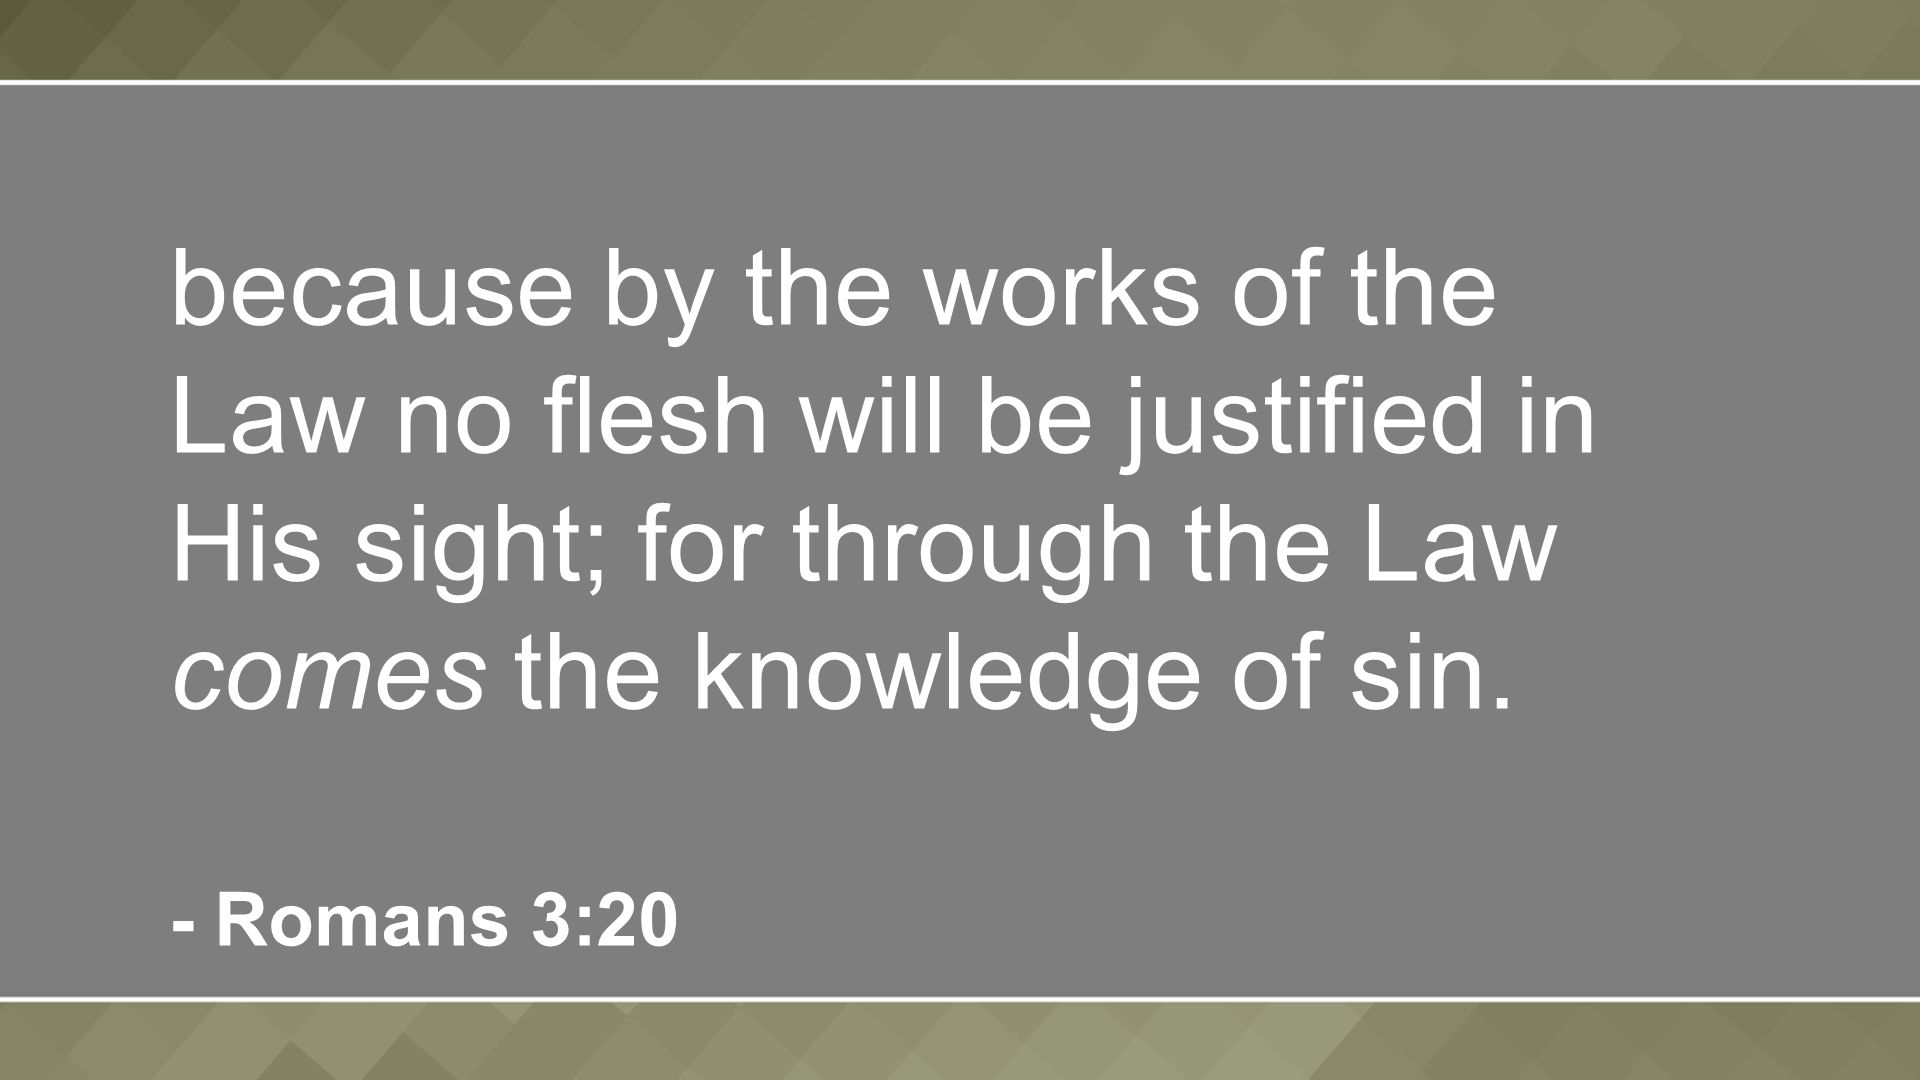 because by the works of the Law no flesh will be justified in His sight; for through the Law comes the knowledge of sin.